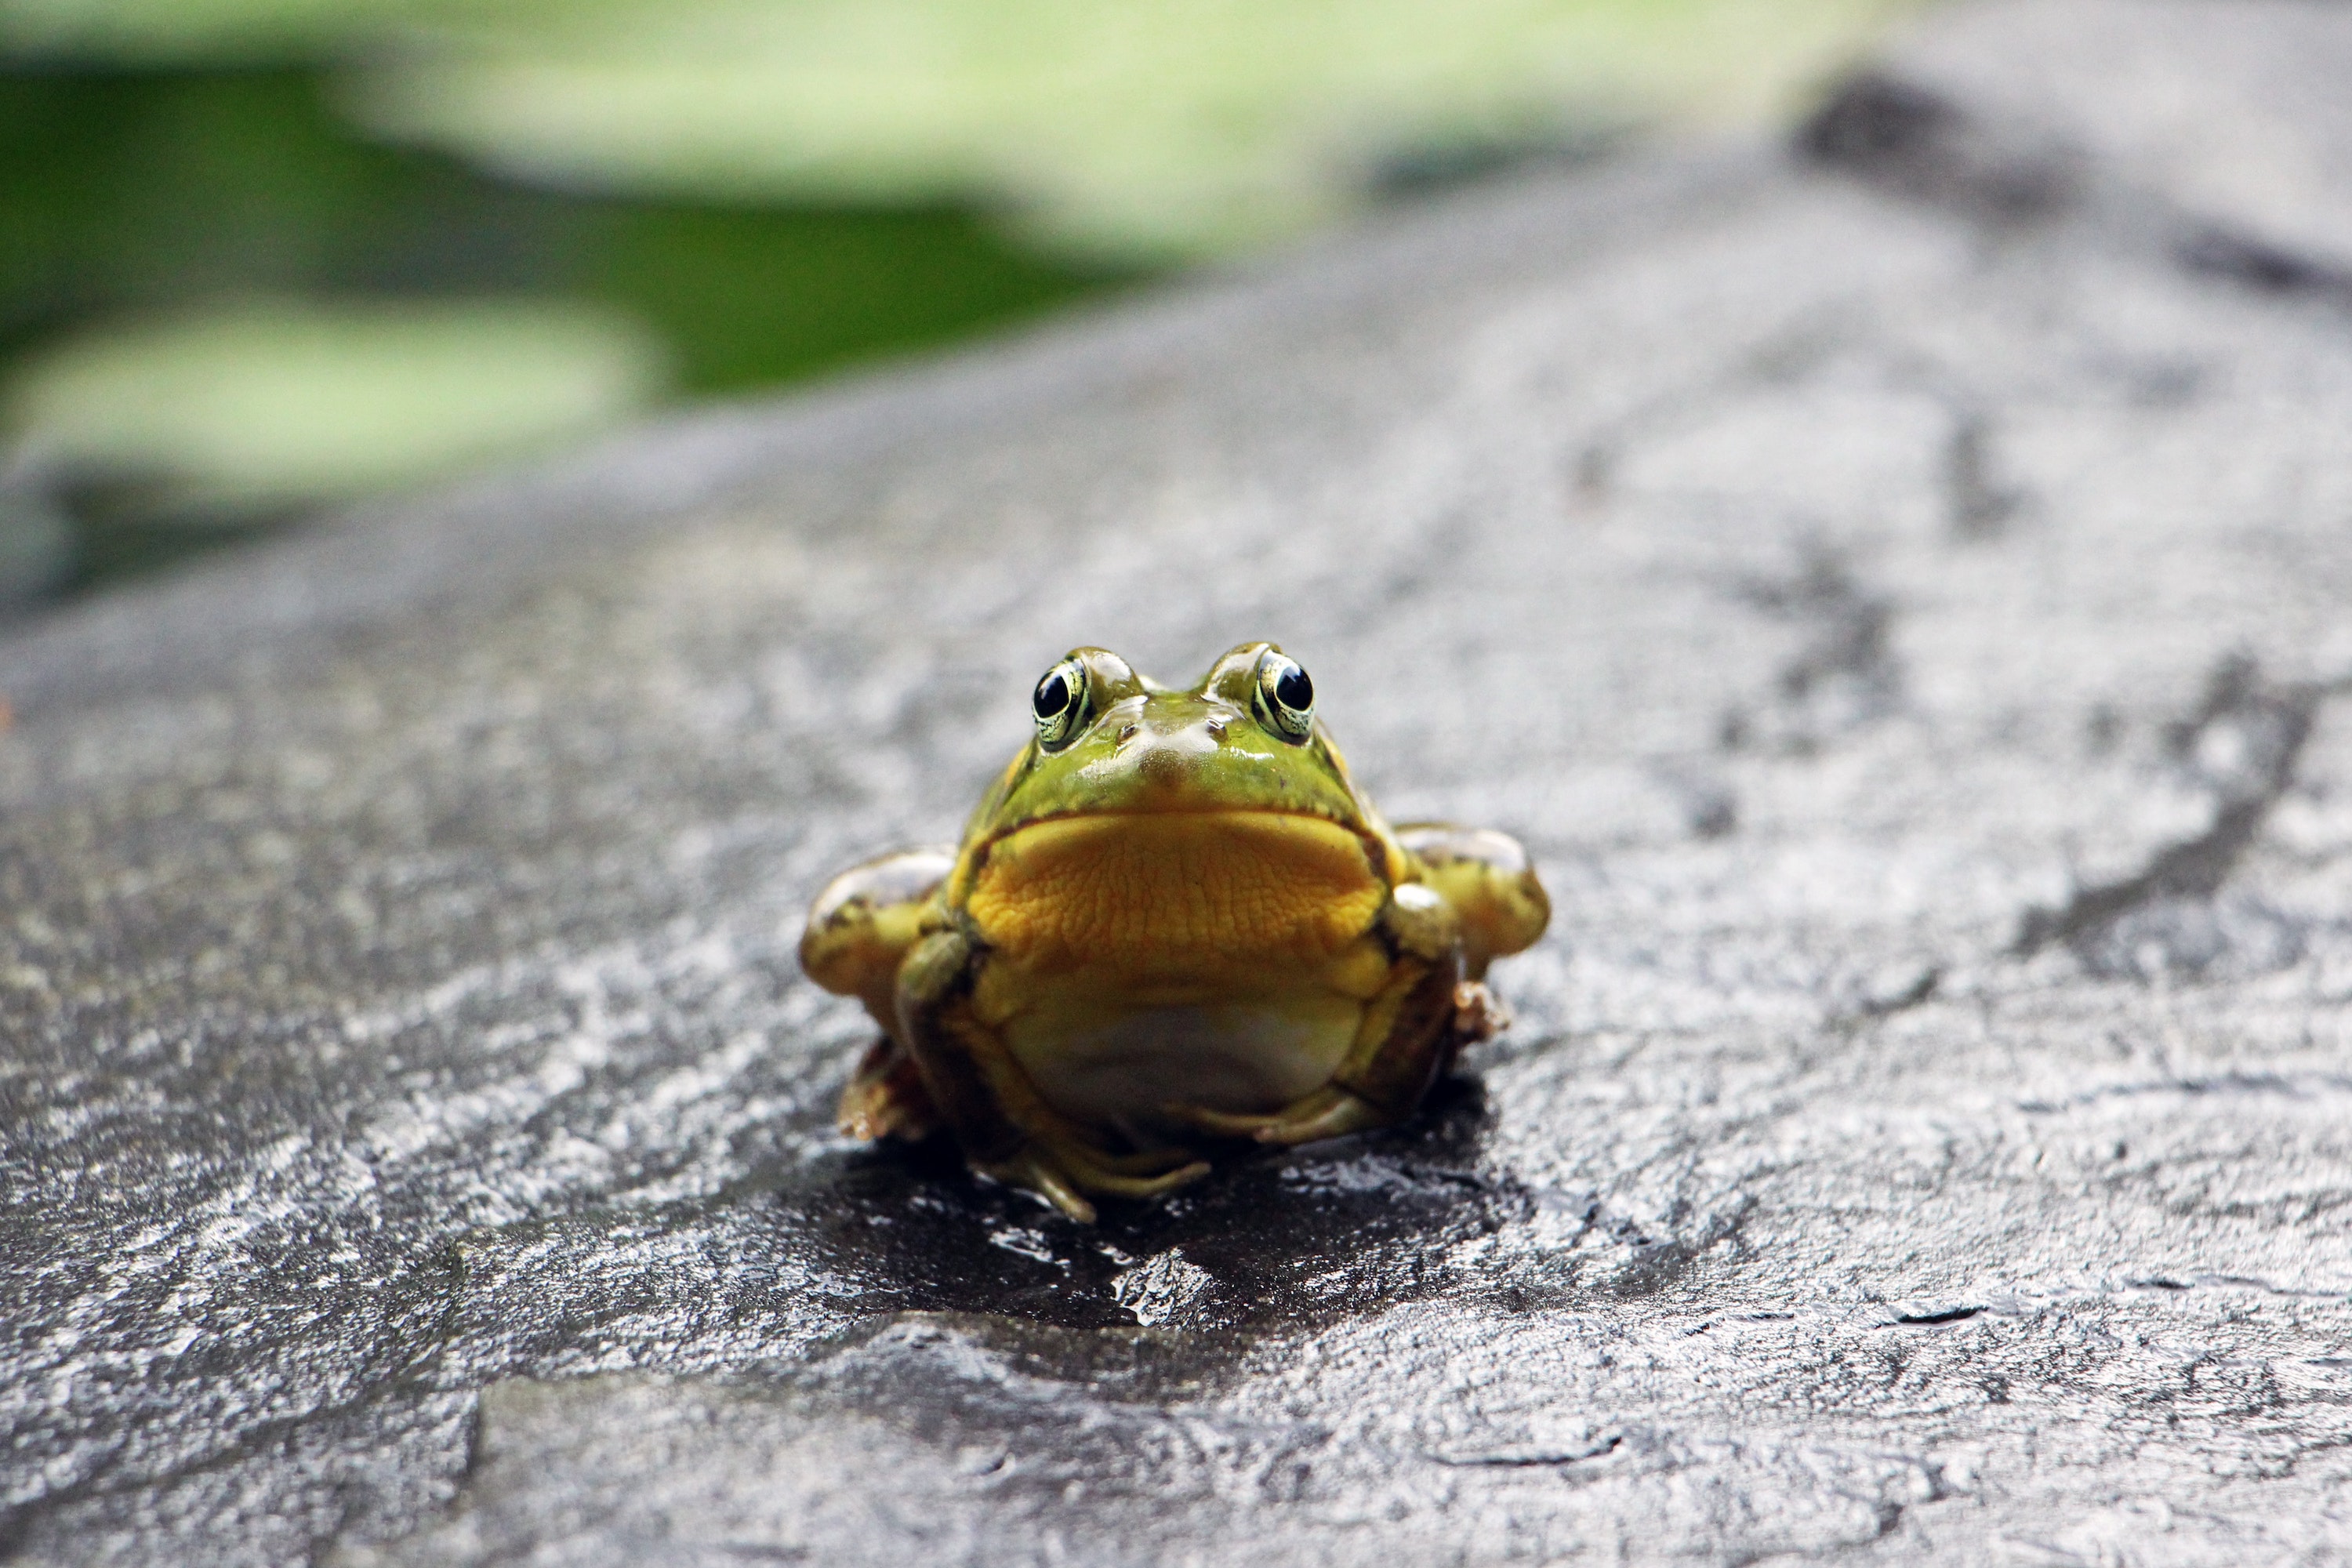 Here's What You Can (and Cannot) Feed Tadpoles and Frogs